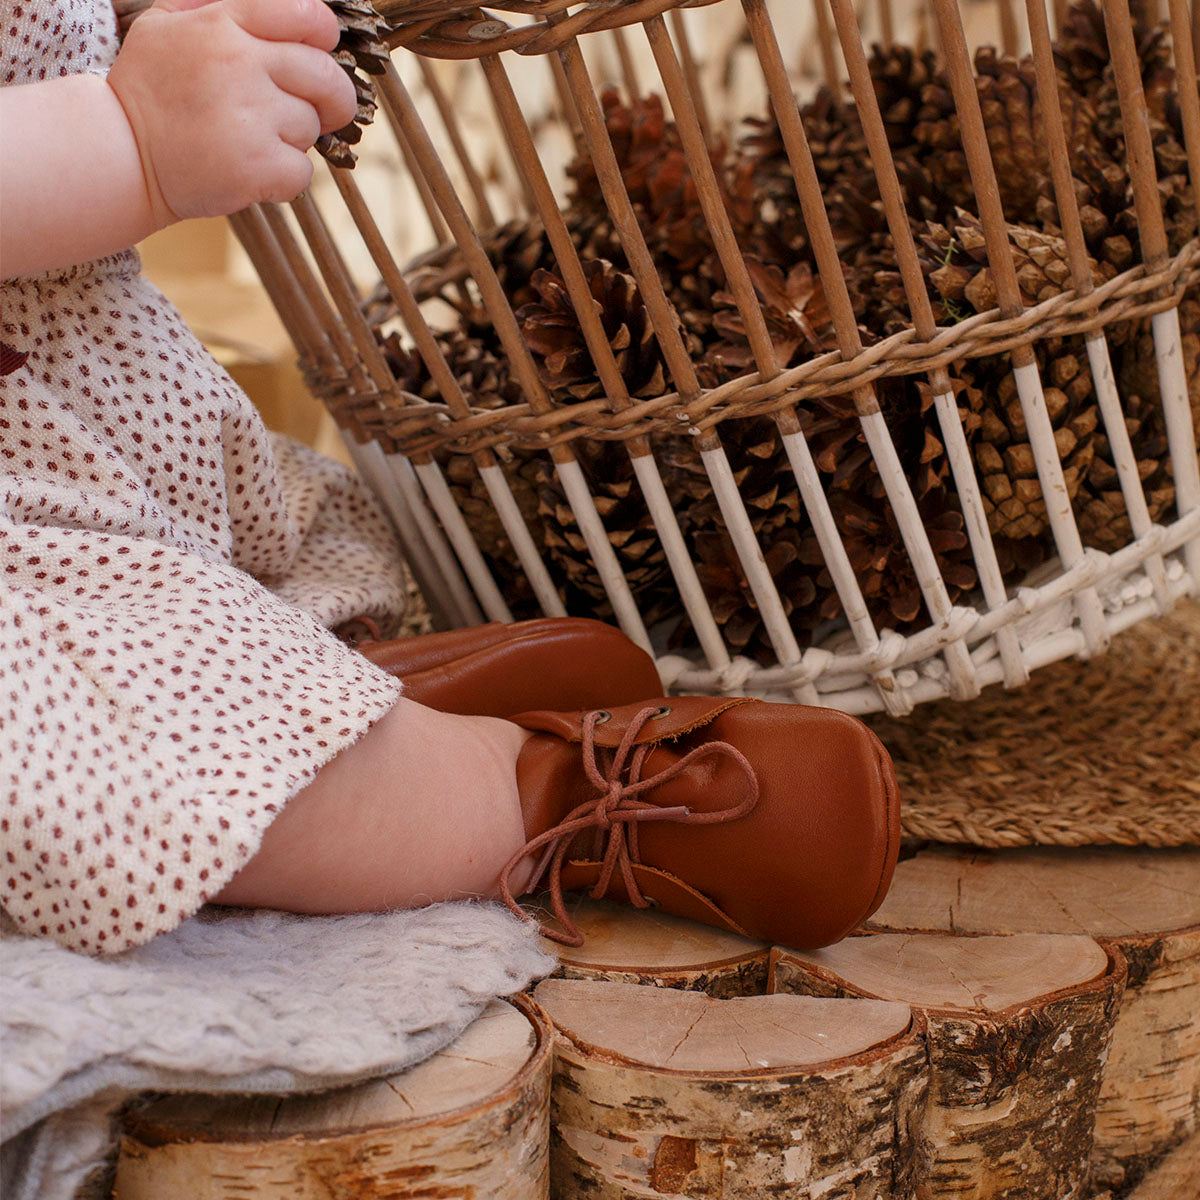 Baby Leather Booties 